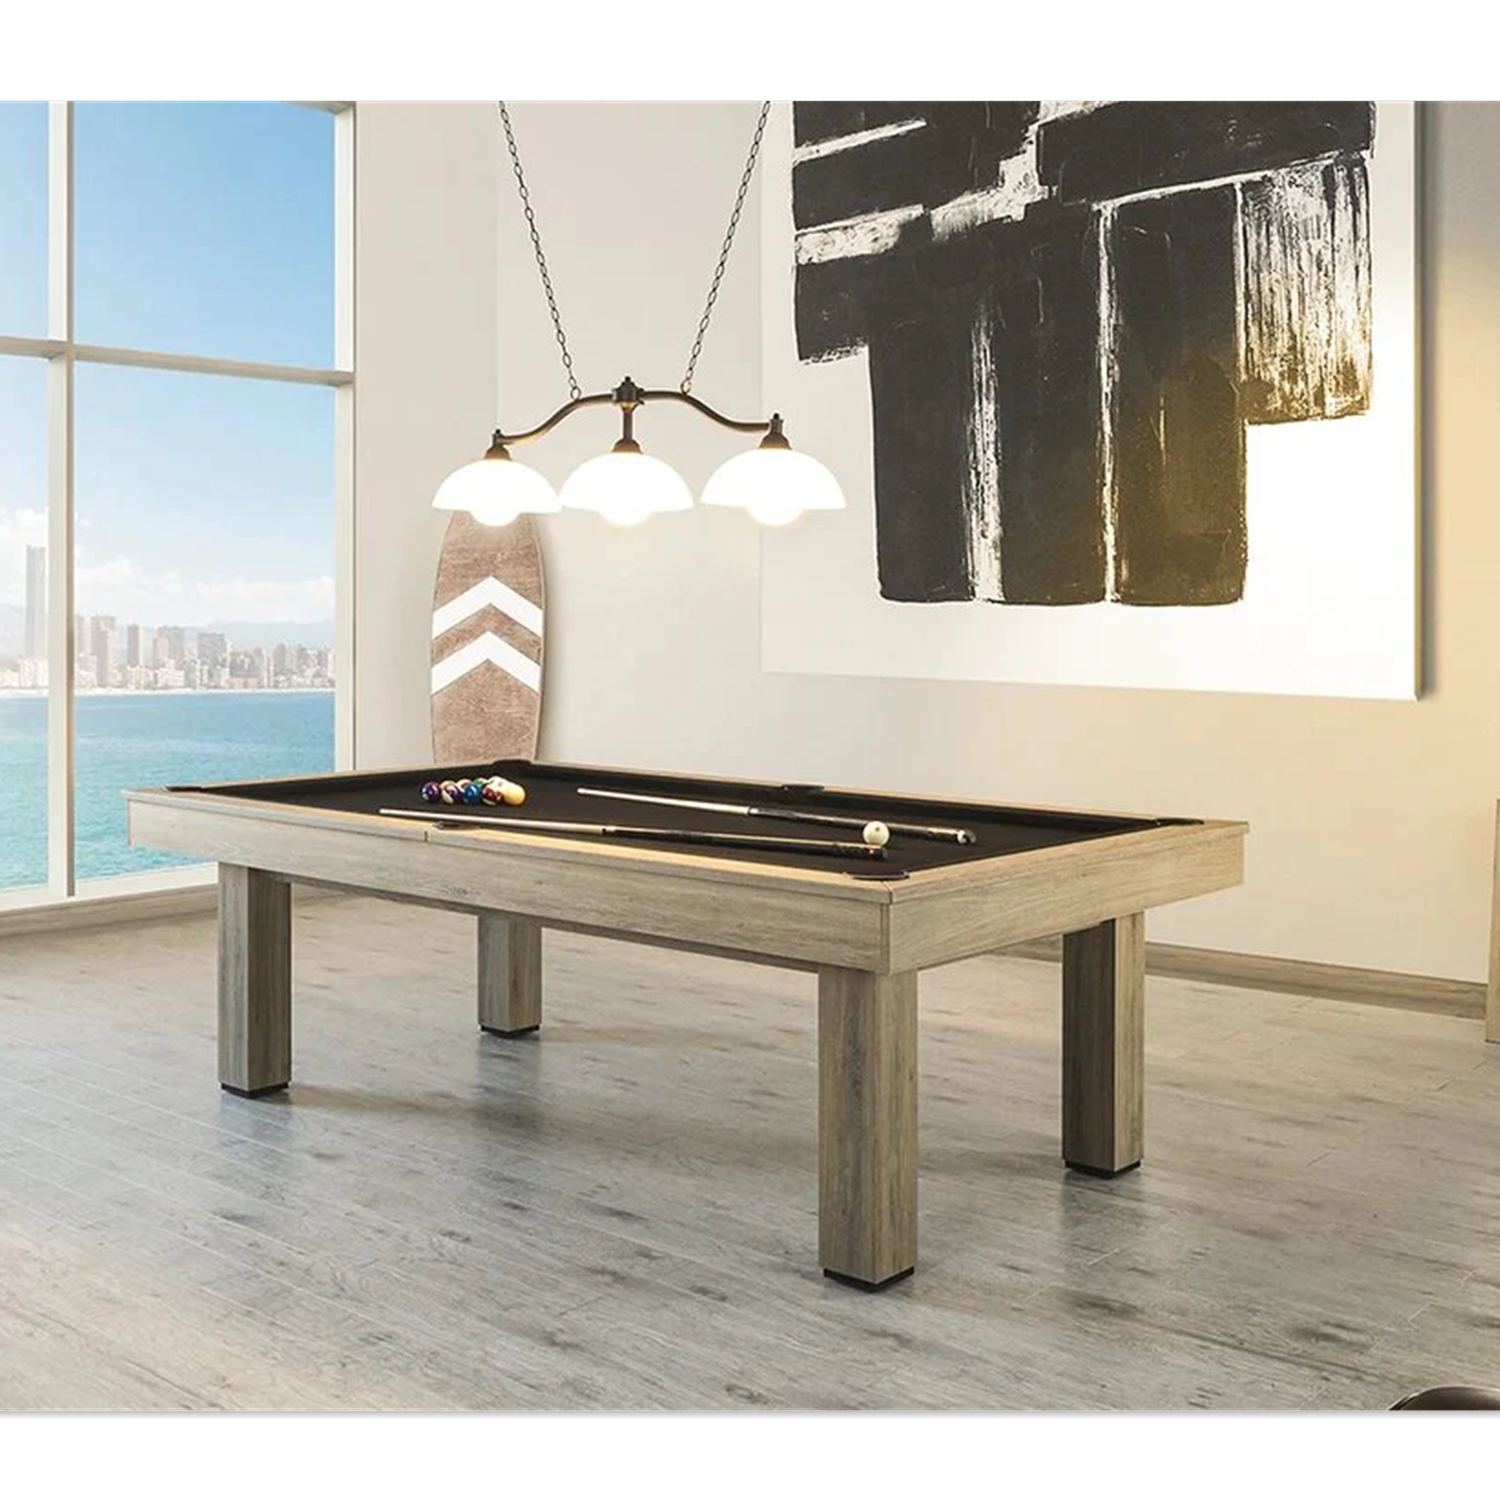 Lucca 3IN1 Dining Pool Table - 3IN1 7FT | Limited-edition Colour